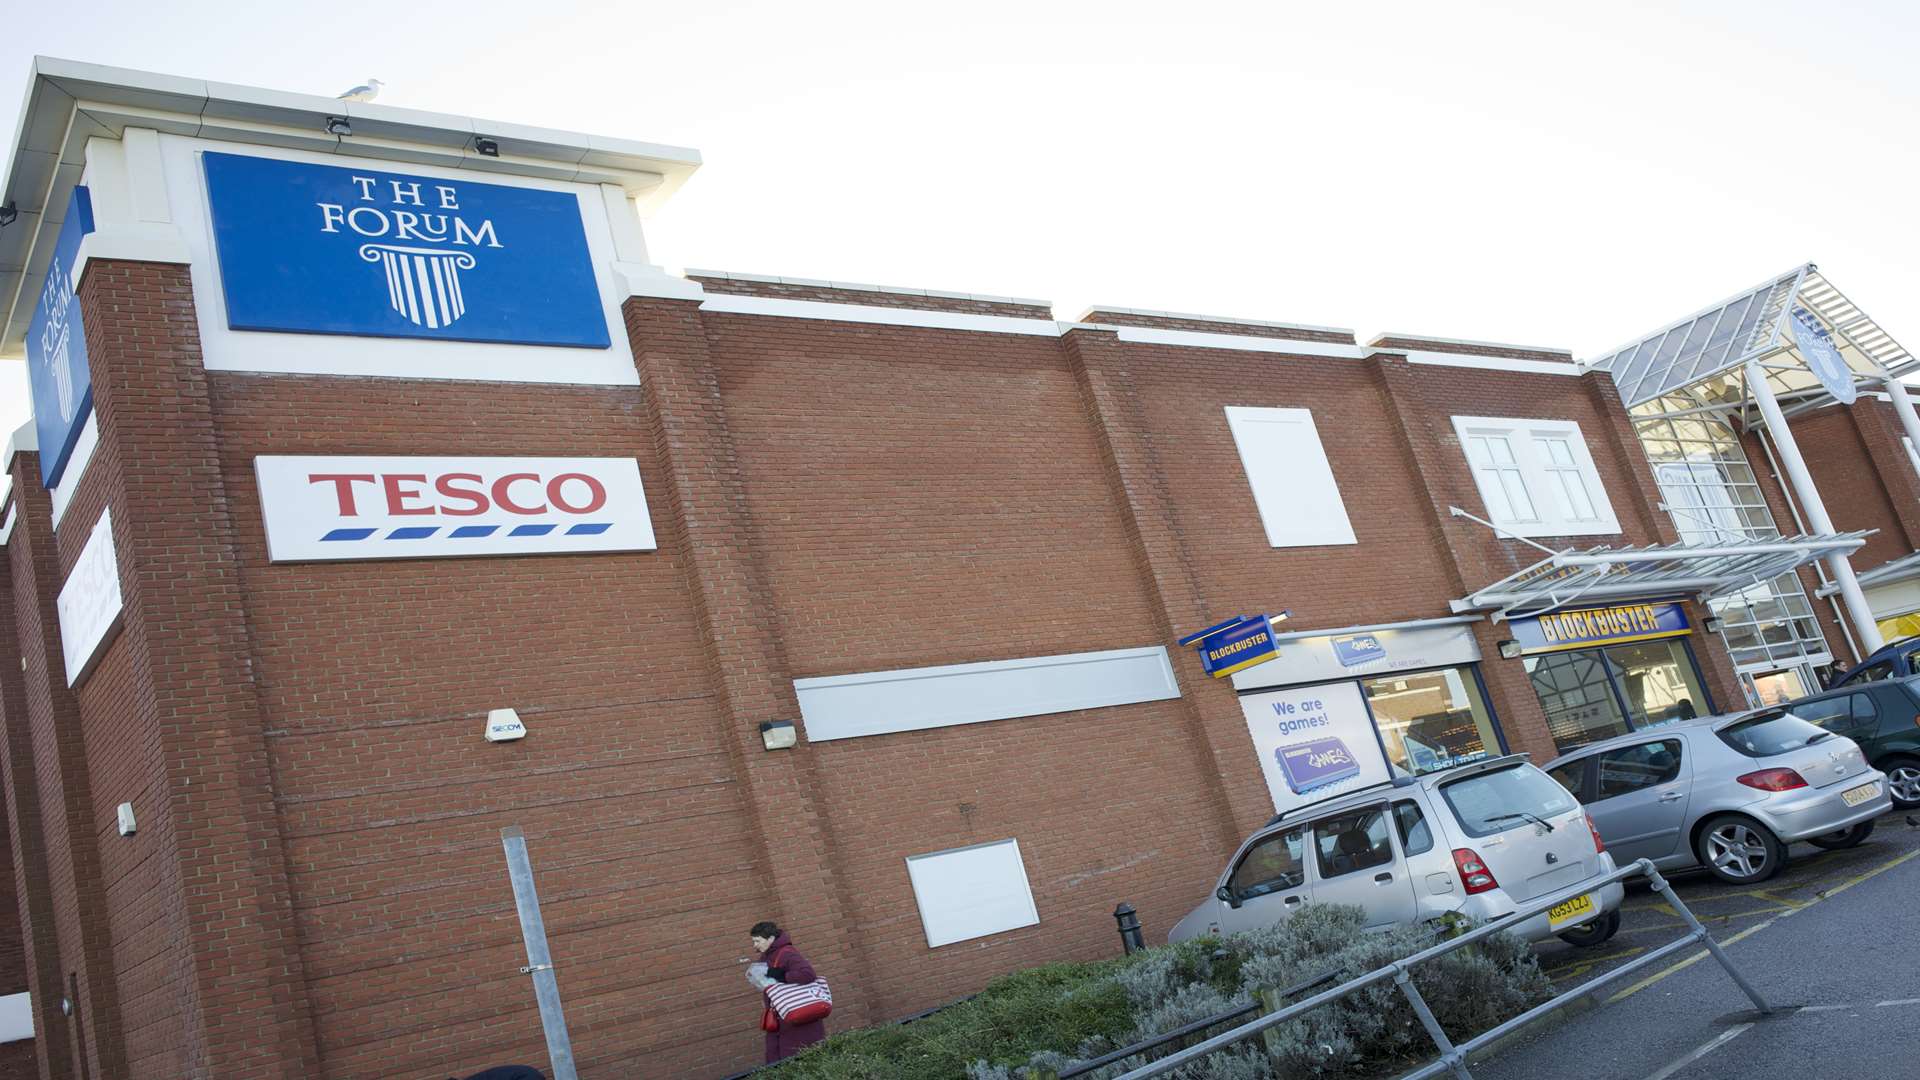 Tesco is to close its store in The Forum shopping centre in Sittingbourne